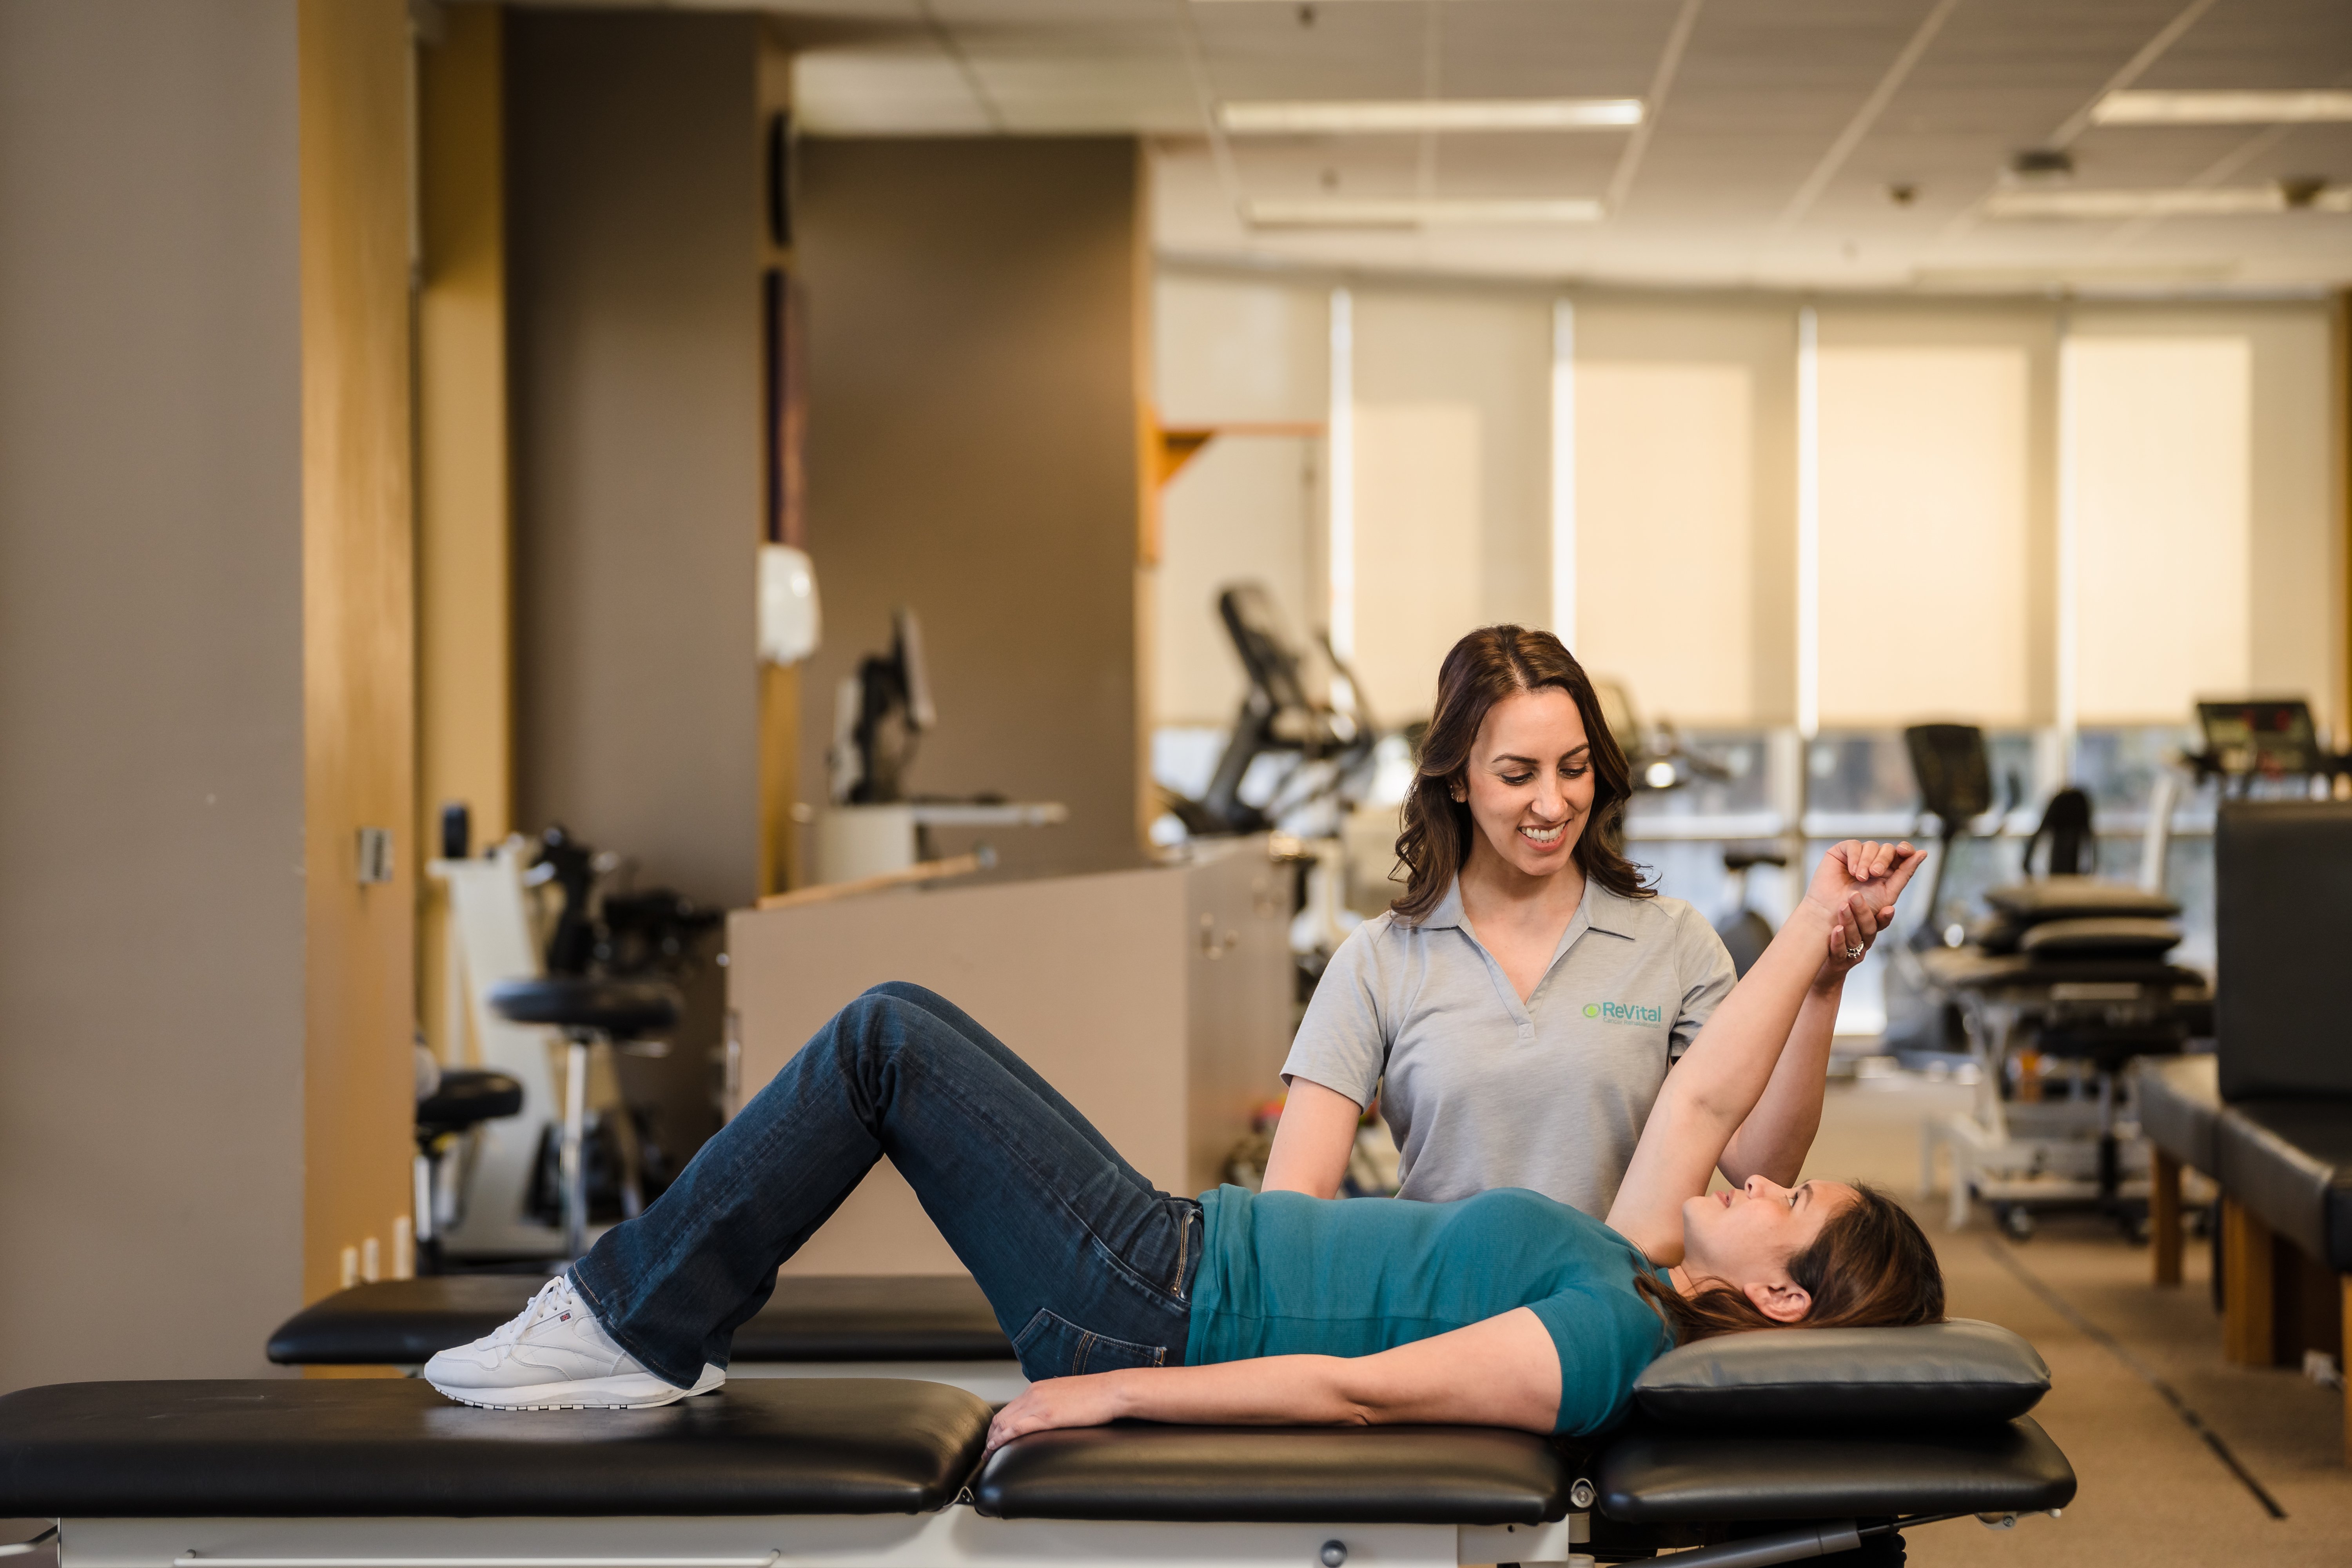 Physical therapist helps stretch a patient's arm while they lay on a table.